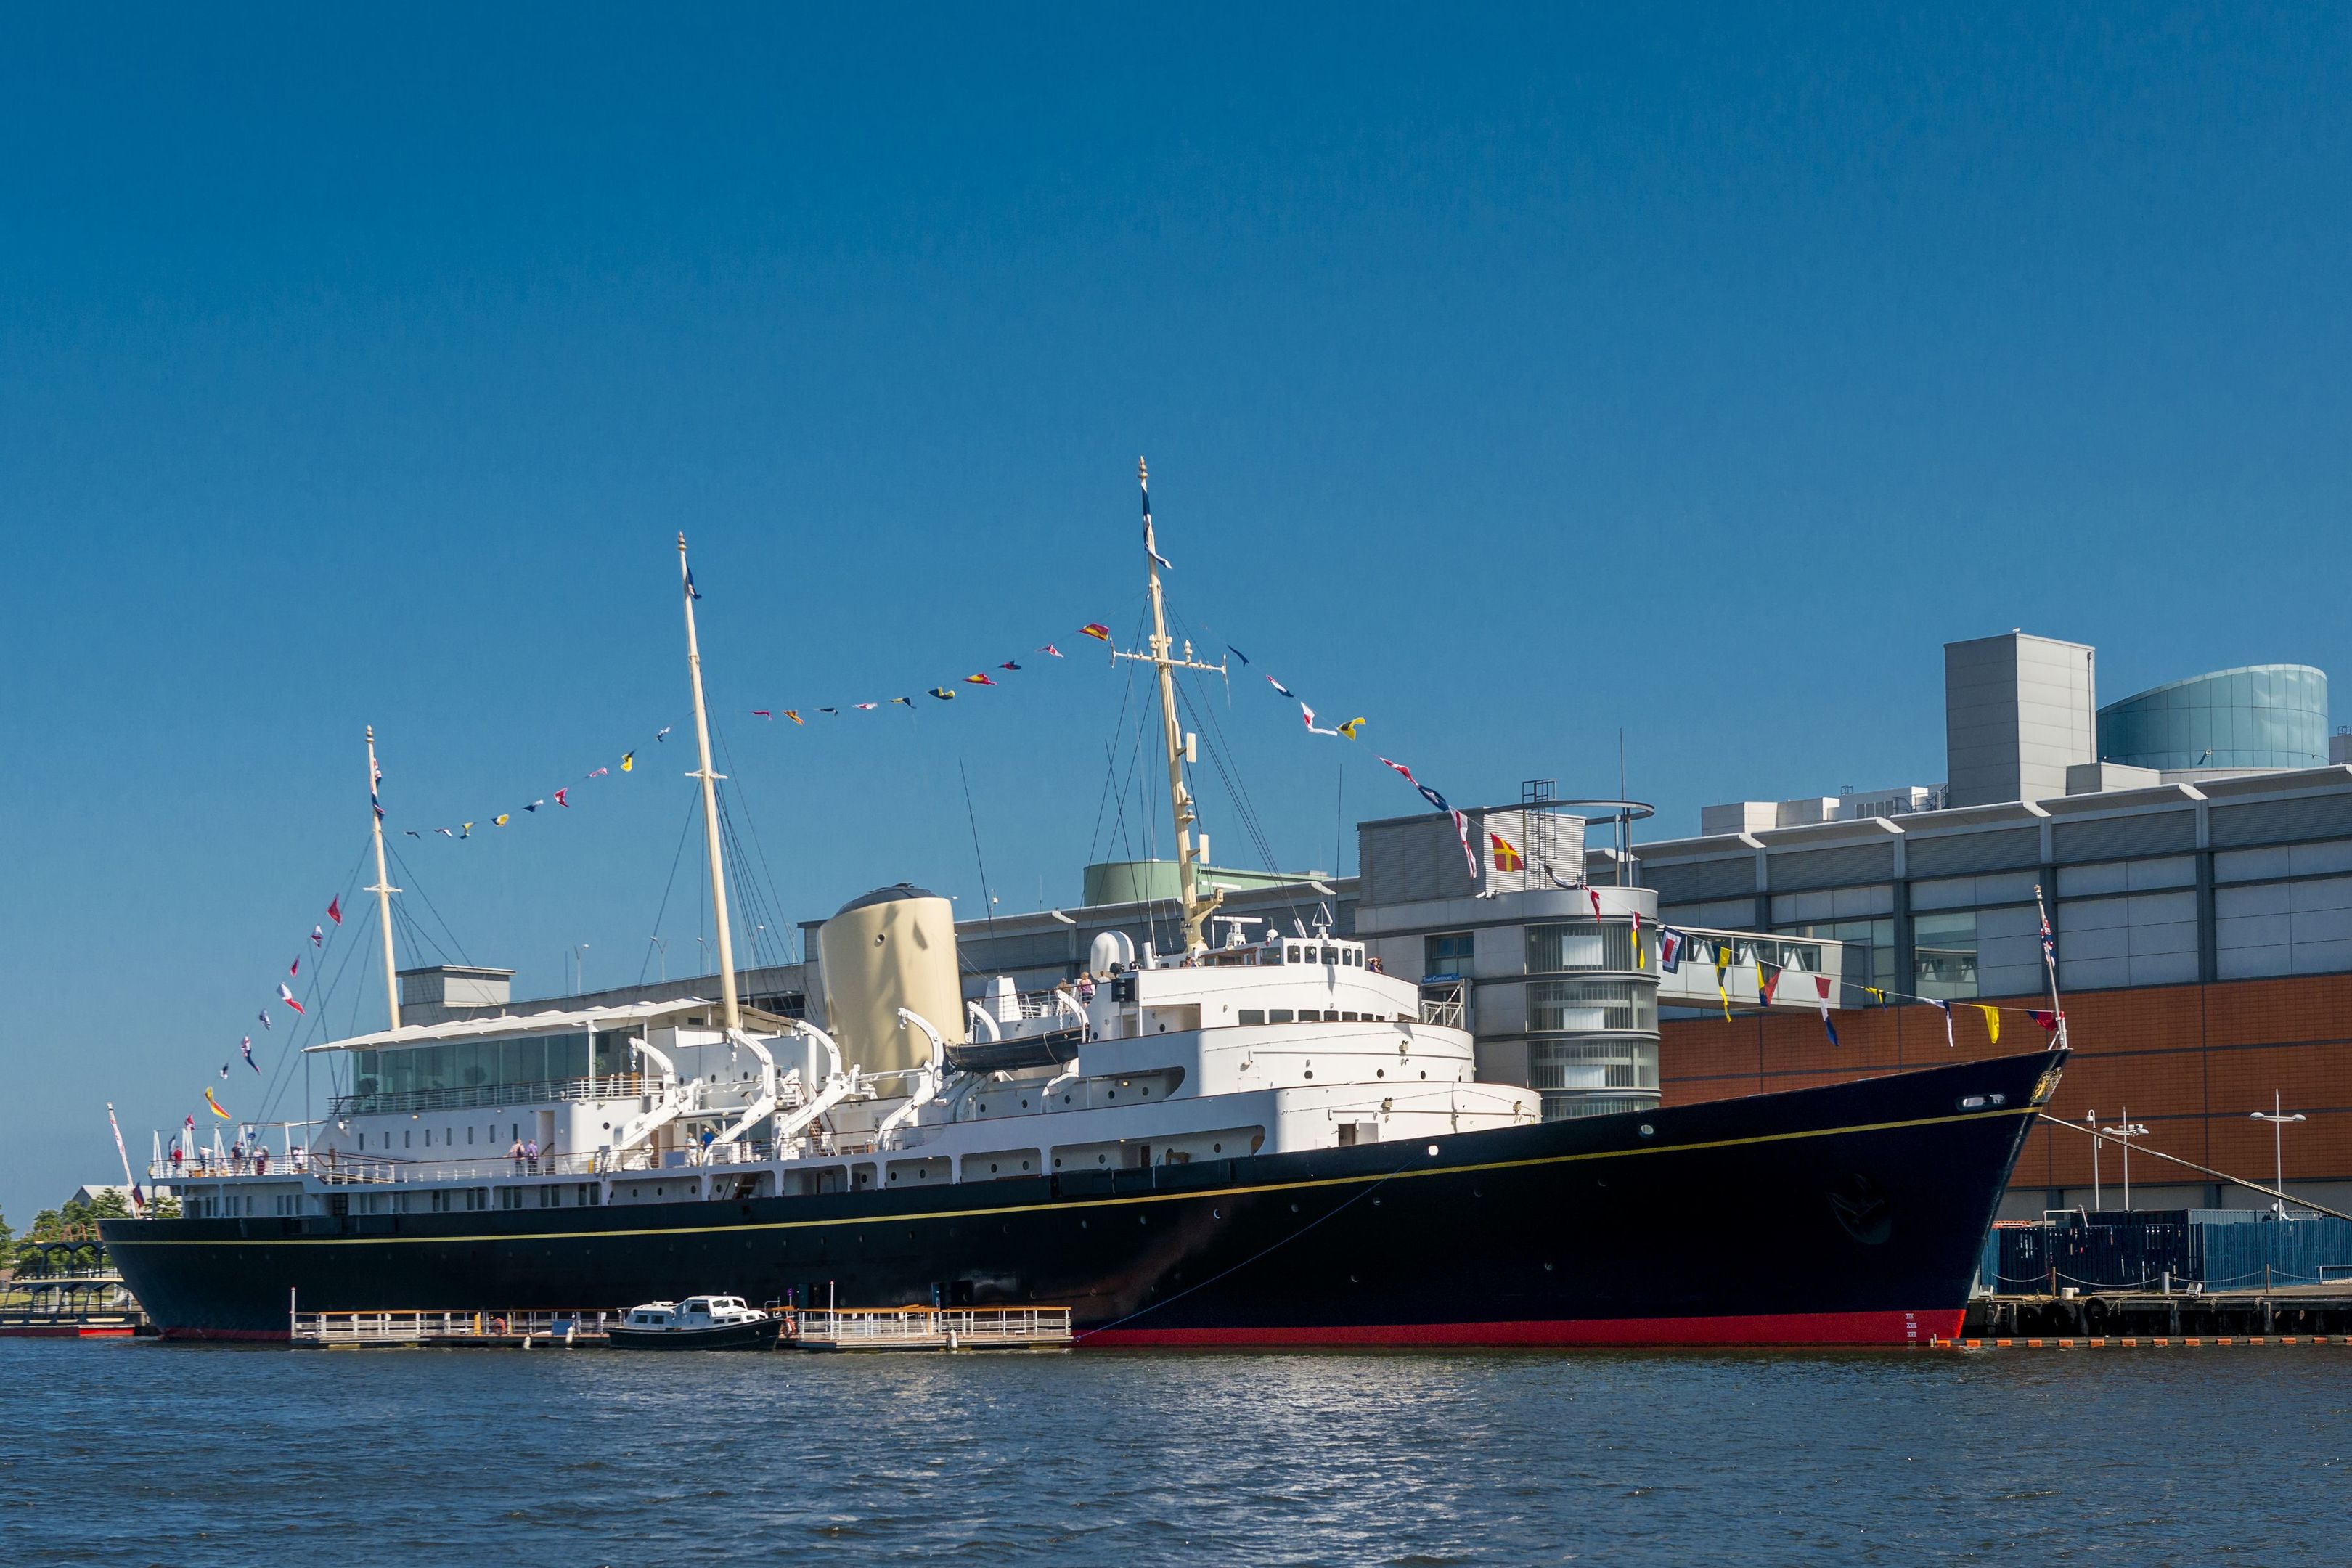 royal yacht today